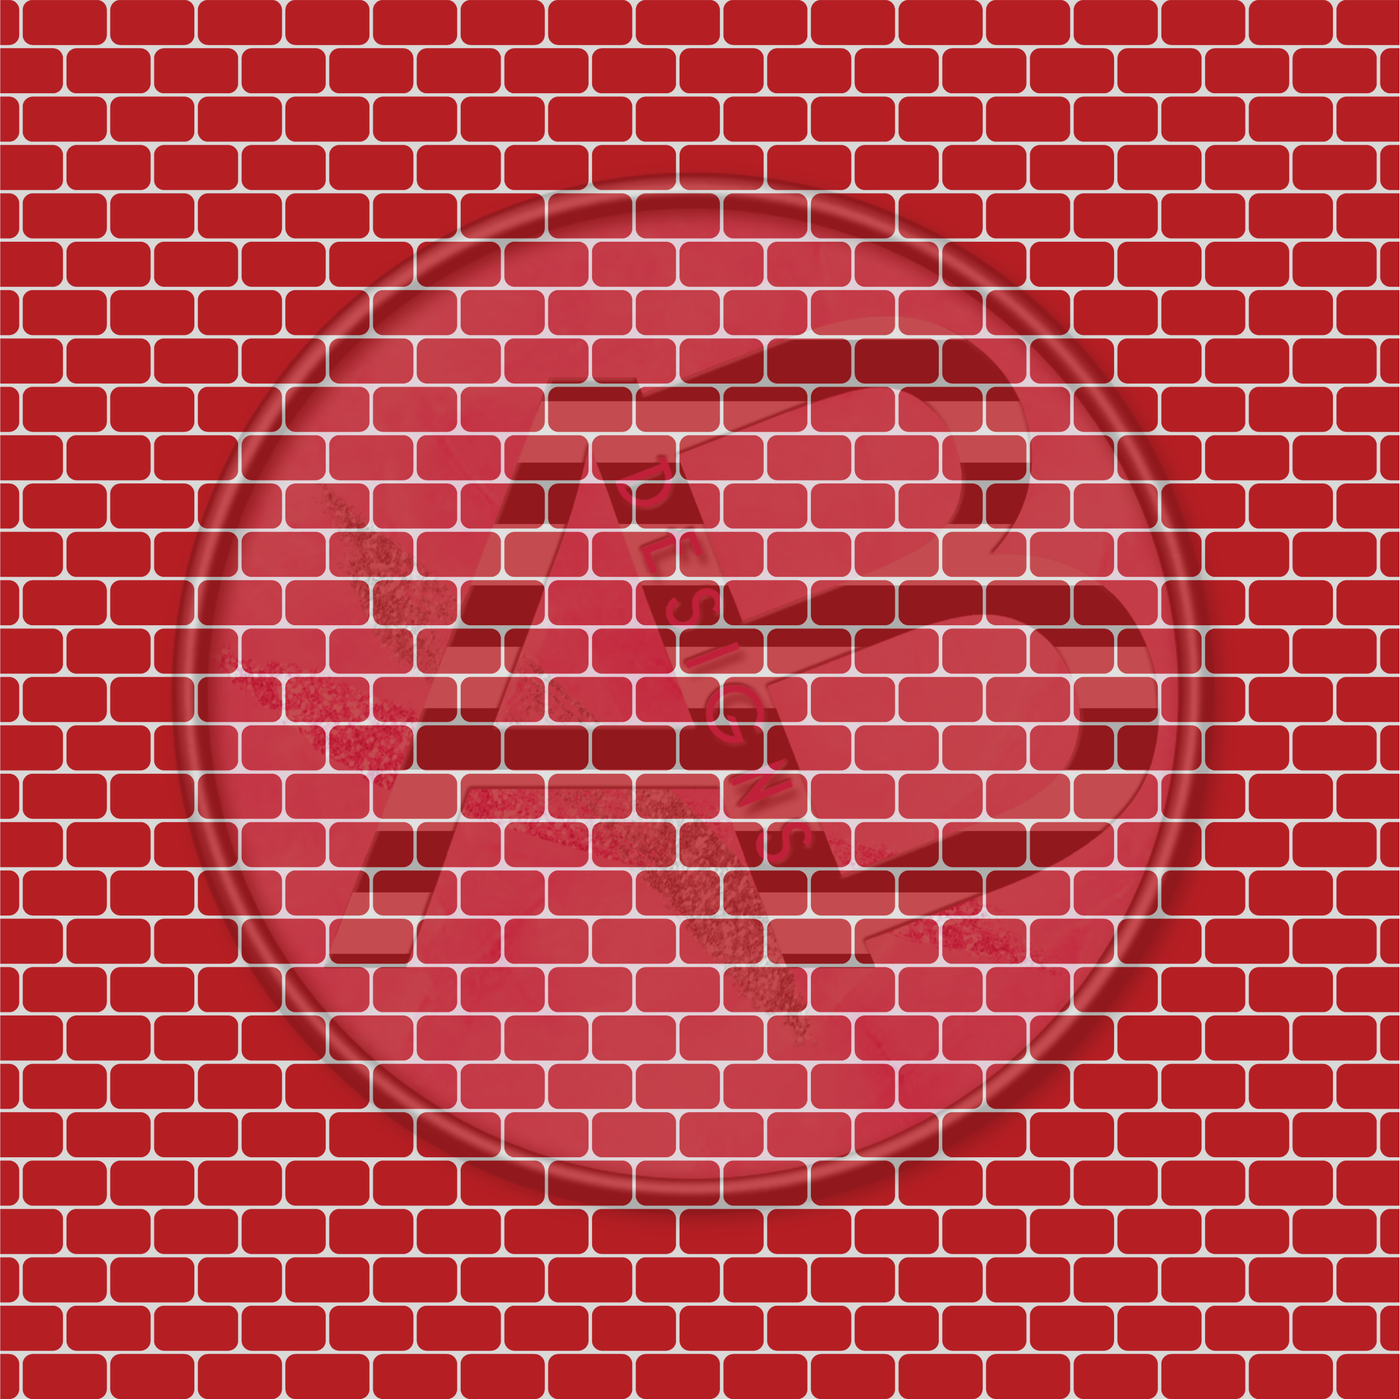 Adhesive Patterned Vinyl - Fire Station 2